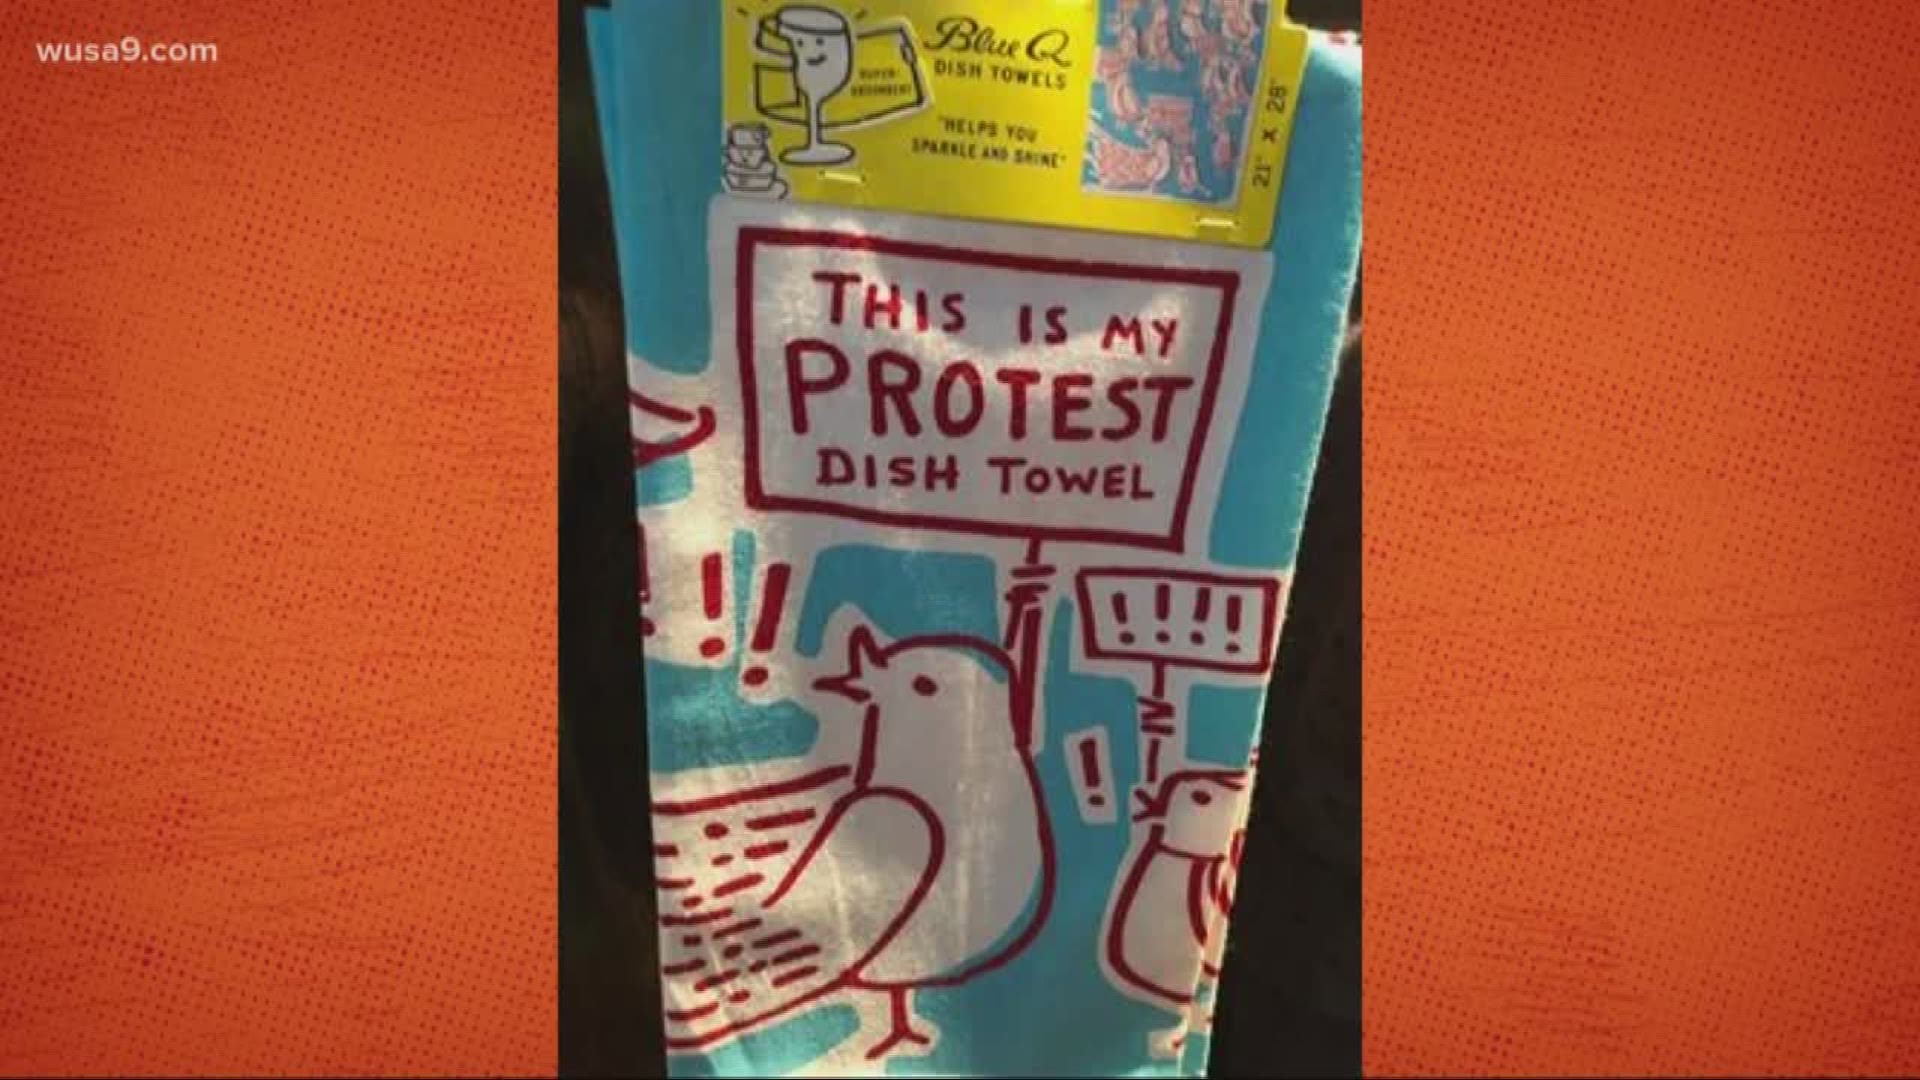 D.C. institution Busboys and Poets has you covered with the Protest Dish Towel so if you need to protest in your kitchen, you've got something to raise up over your head and spin like a helicopter!